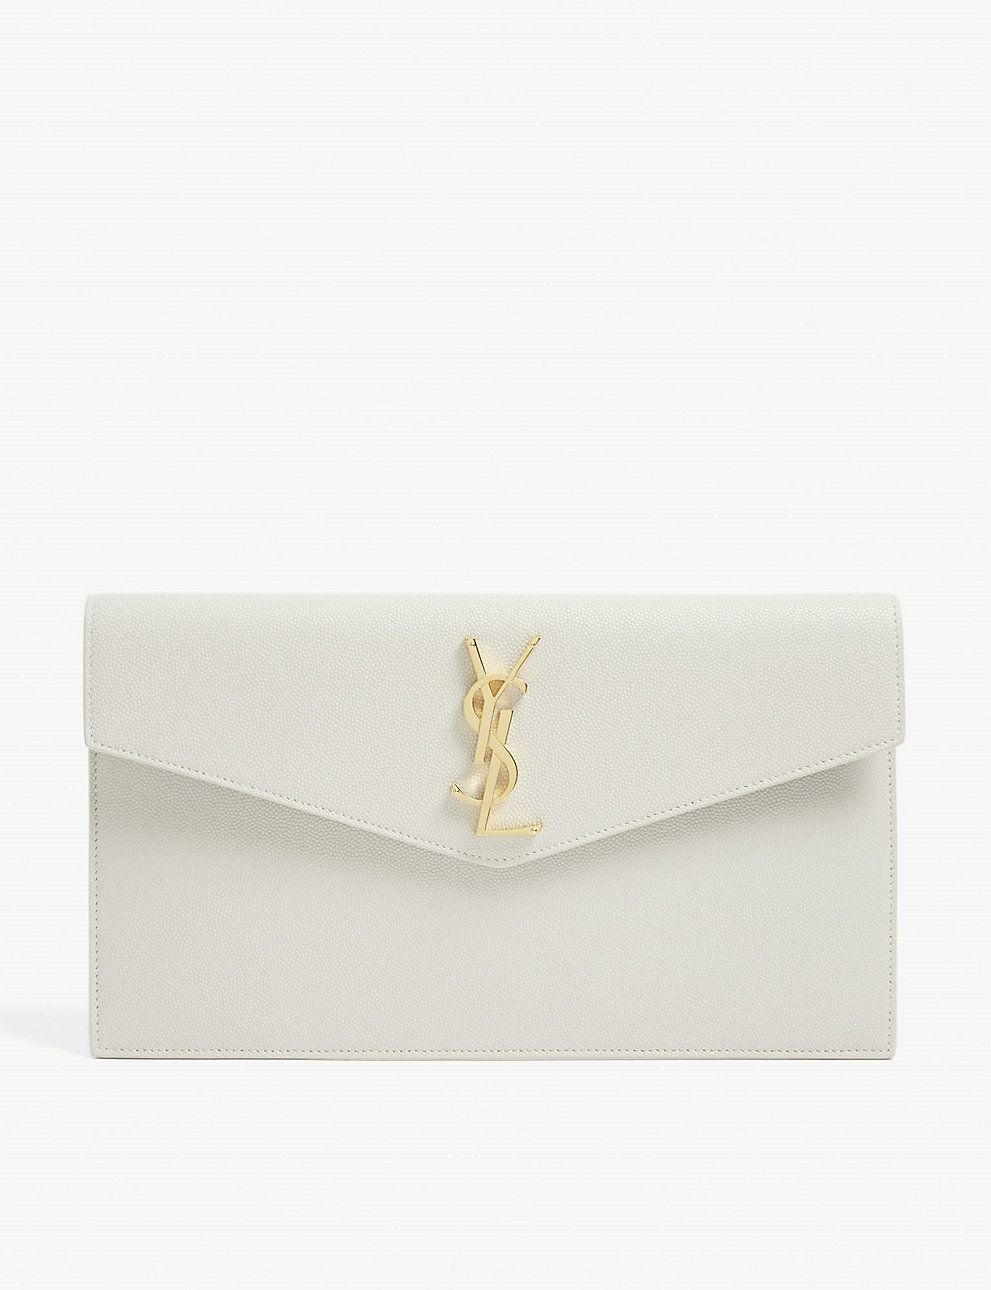 Uptown grained leather envelope pouch | Selfridges